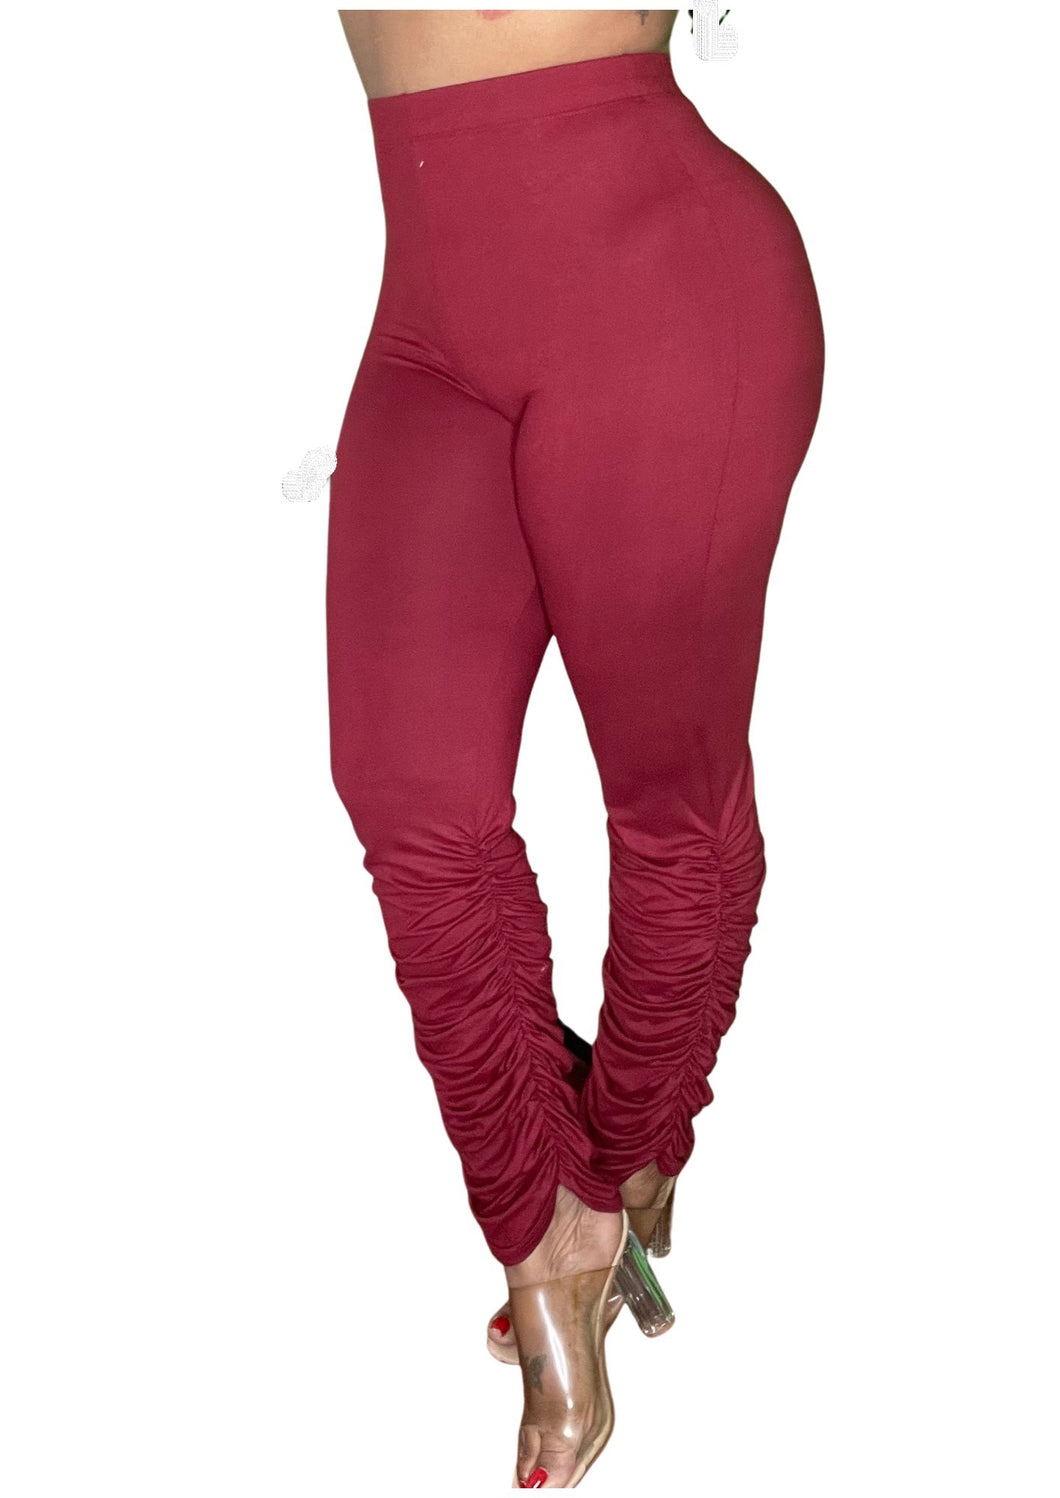 She's Scrunched Leggings 3 colors